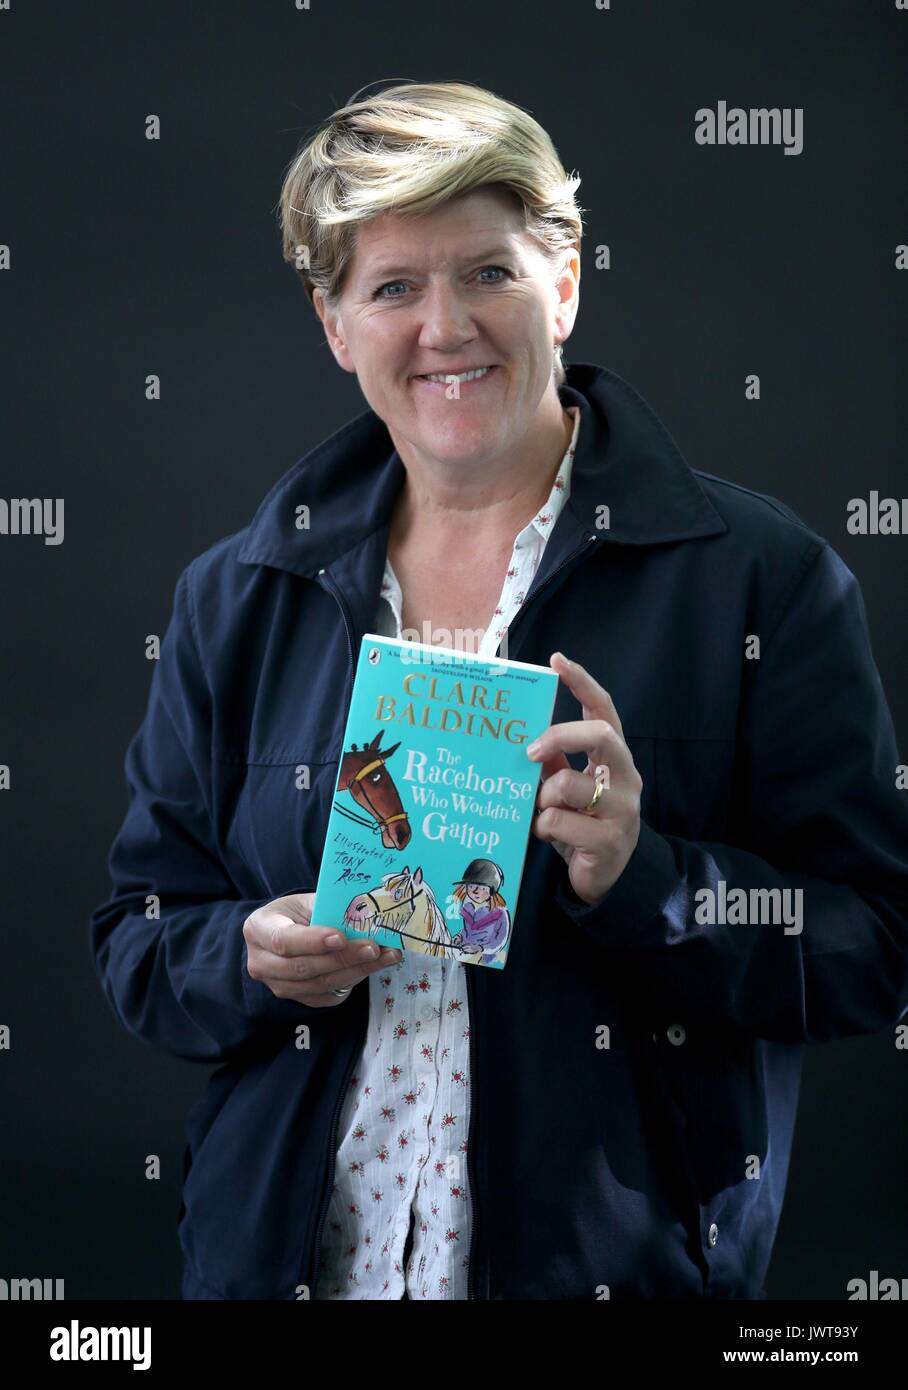 Broadcaster and author Clare Balding at the Edinburgh International Book Festival 2017 where she presented her debut book for children The Racehorse Who Wouldn't Gallop. Stock Photo